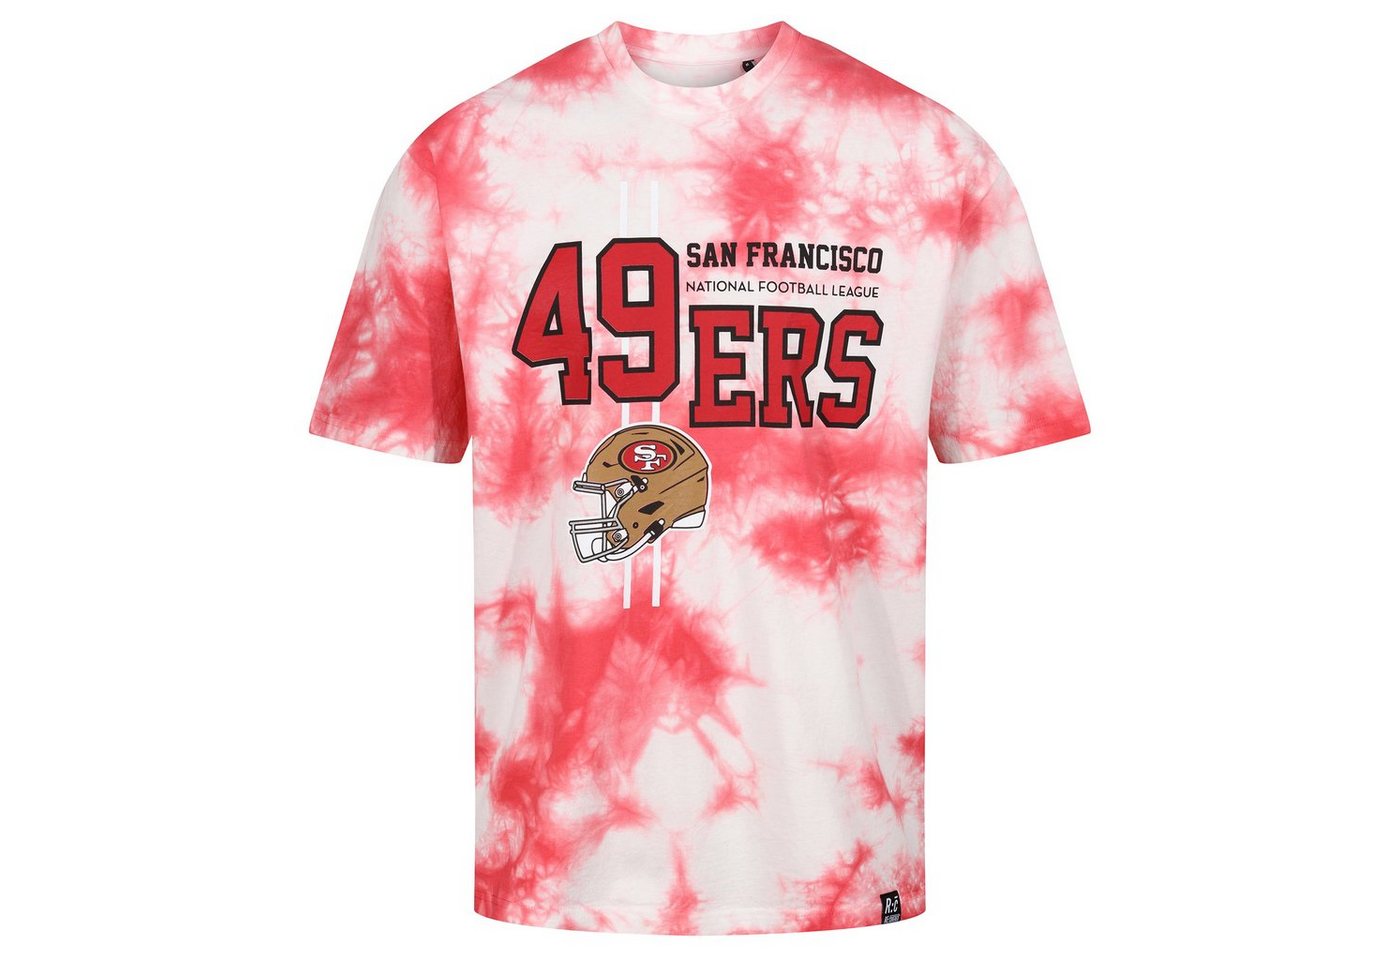 Recovered Print-Shirt San Francisco 49ers - NFL - Tie-Dye Relaxed T-Shirt, Red von Recovered